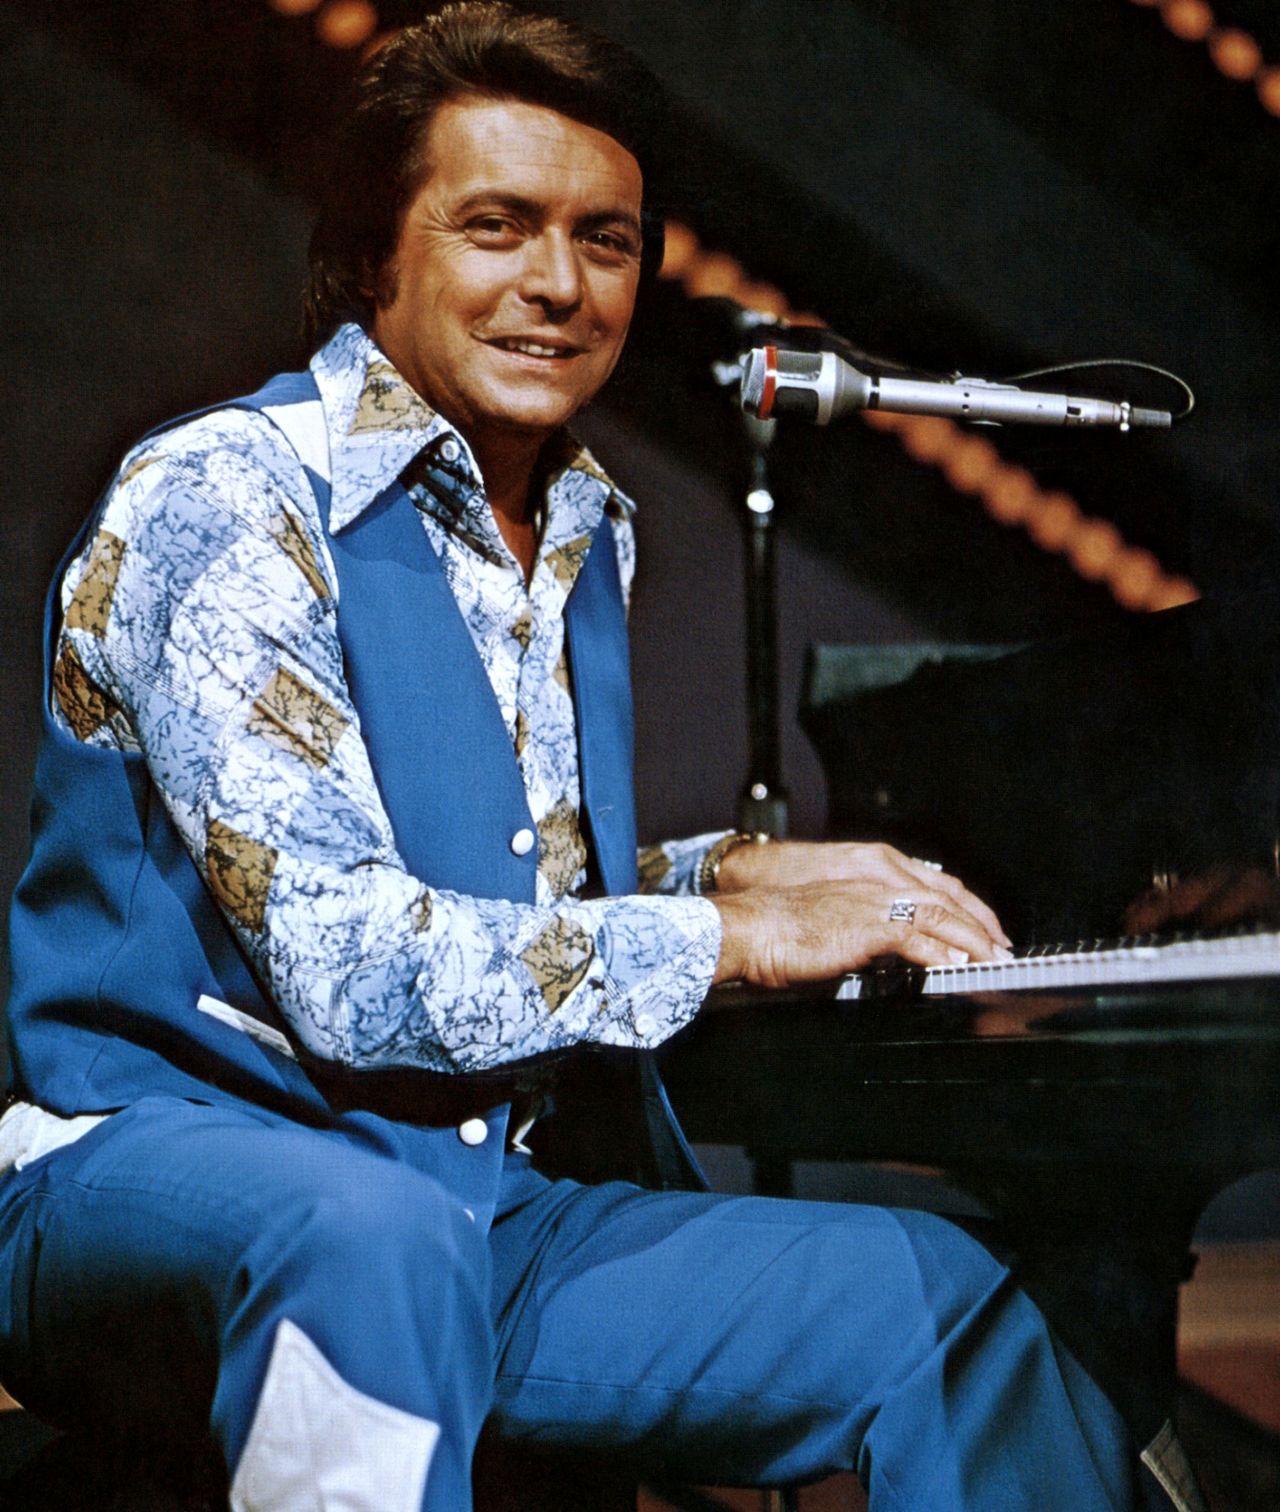 Country singer Mickey Gilley, best known as the pioneer of the 